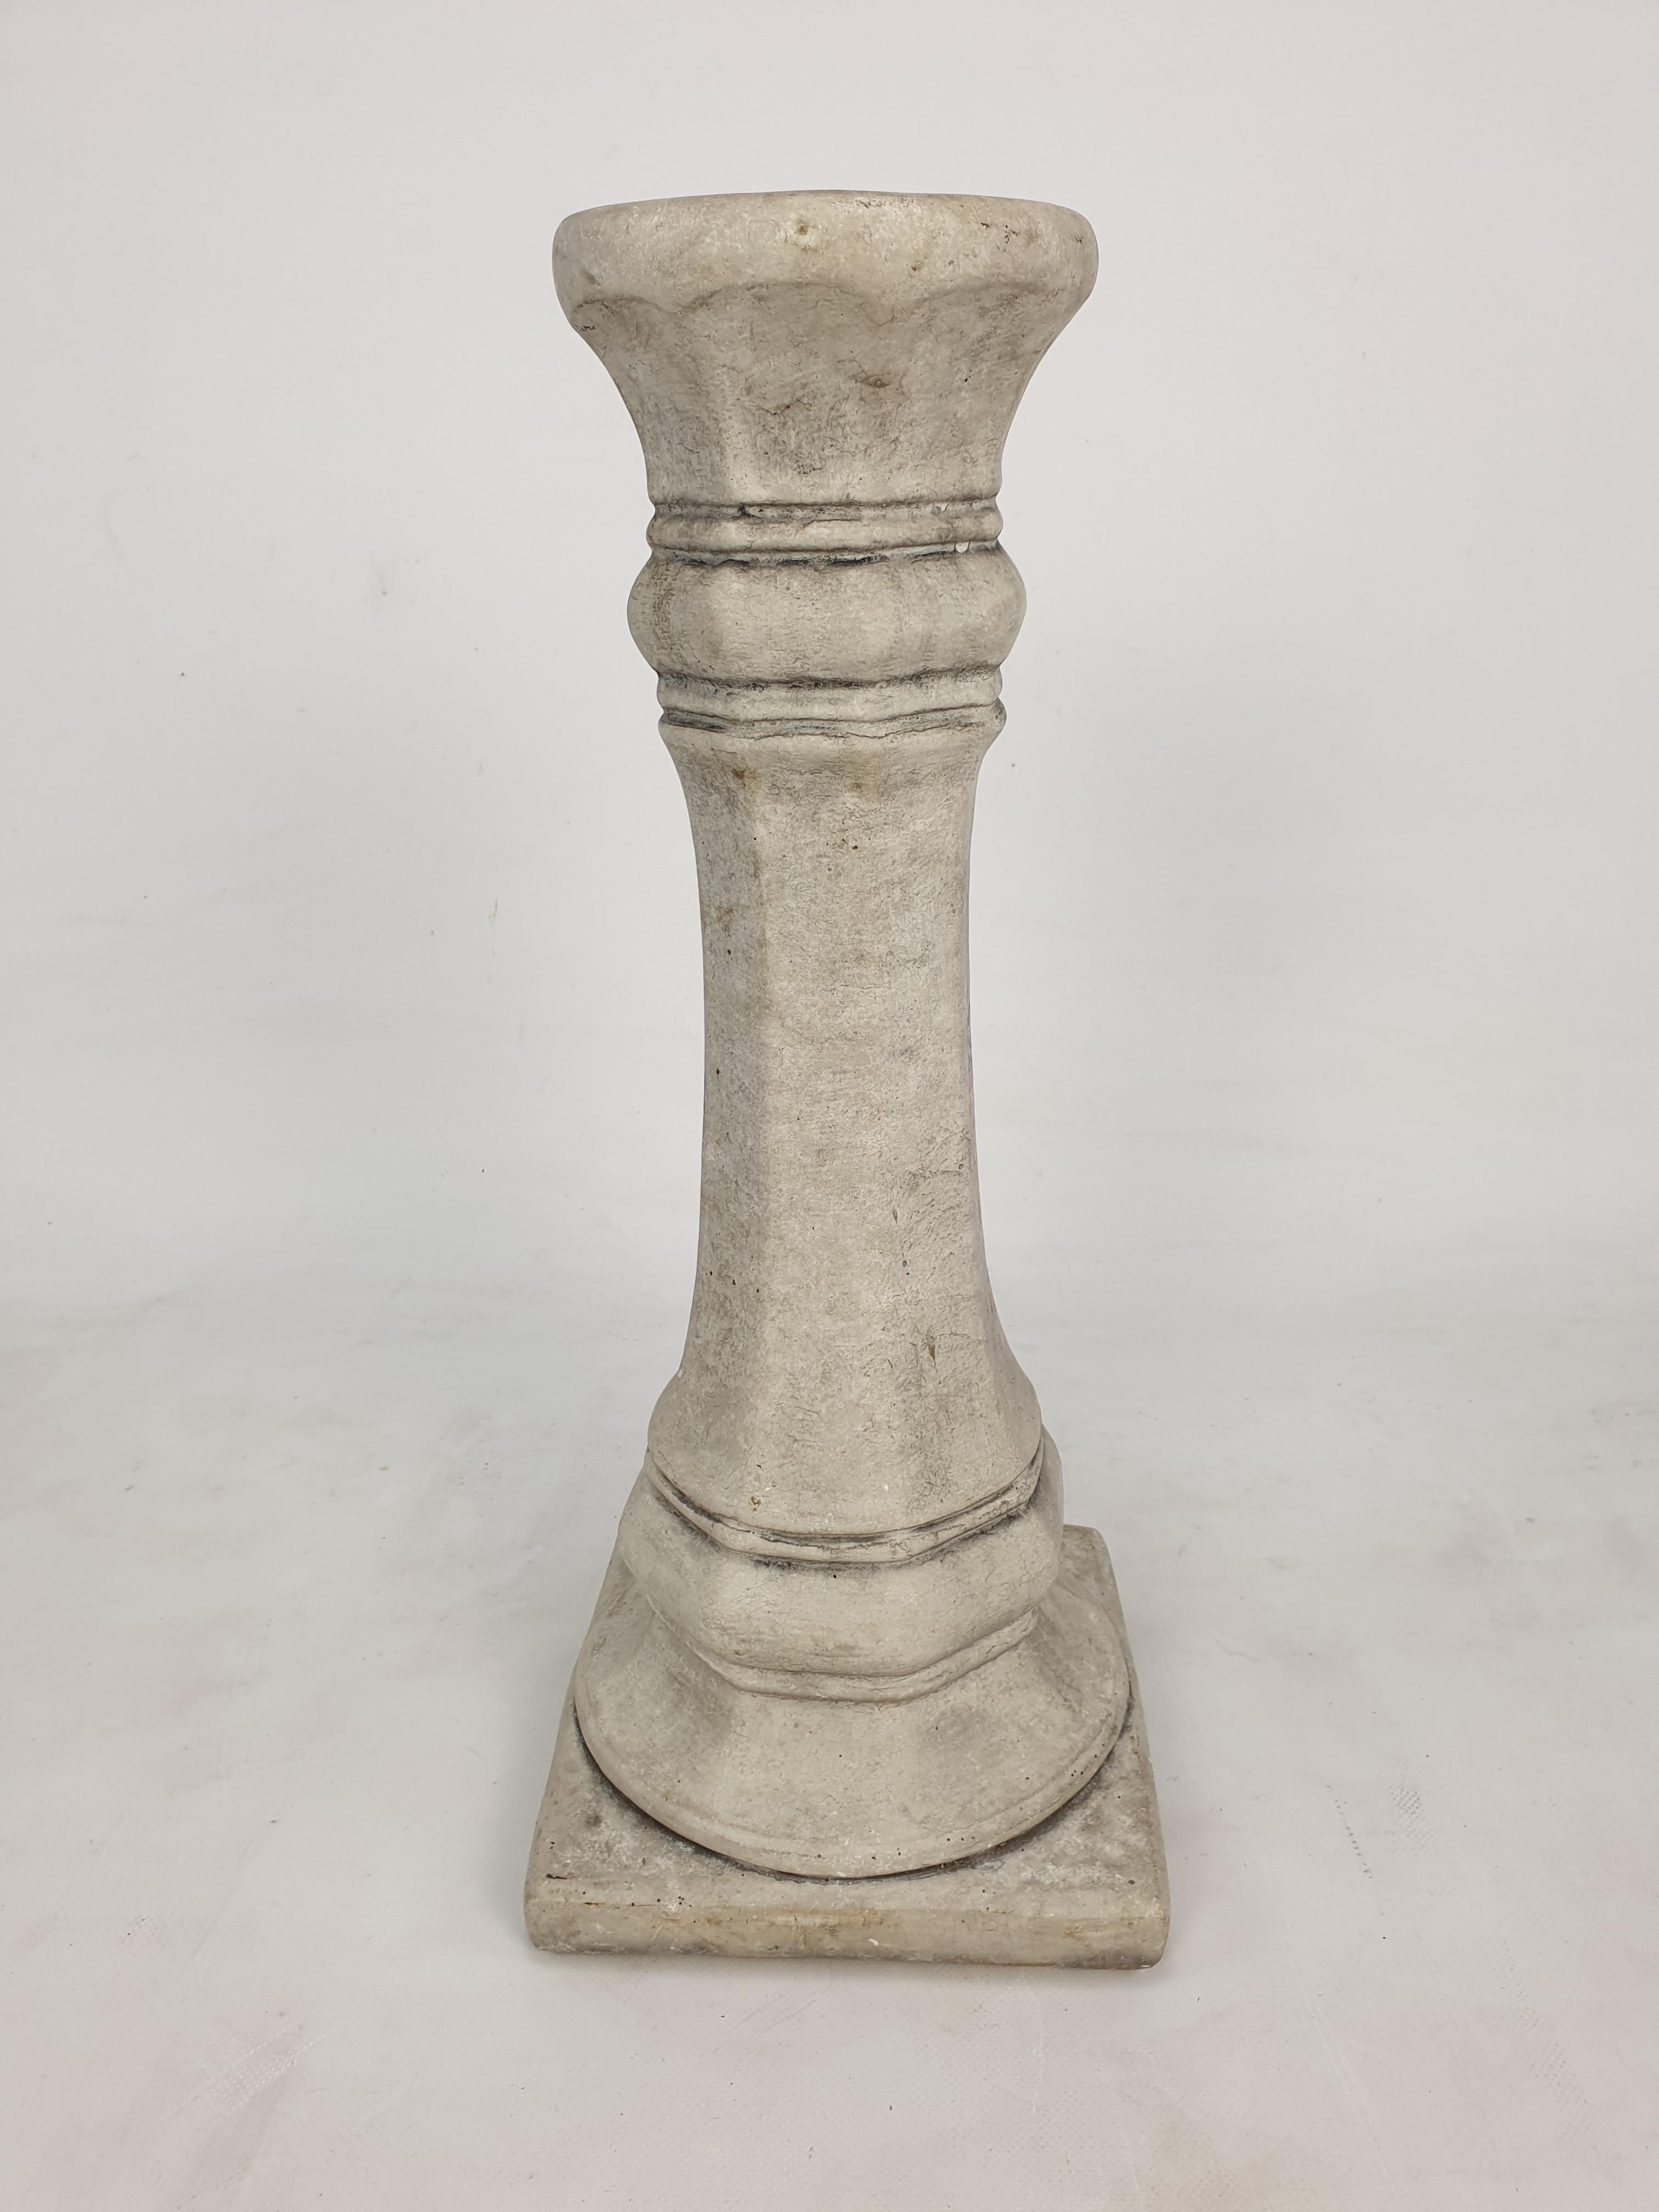 Very nice Italian pedestal, fabricated in the 19th Century.

It is handcrafted out of stone.

It has traces of use, see the pictures. 

We work with professional packers and shippers, we can ship worldwide in 5 to 10 days.